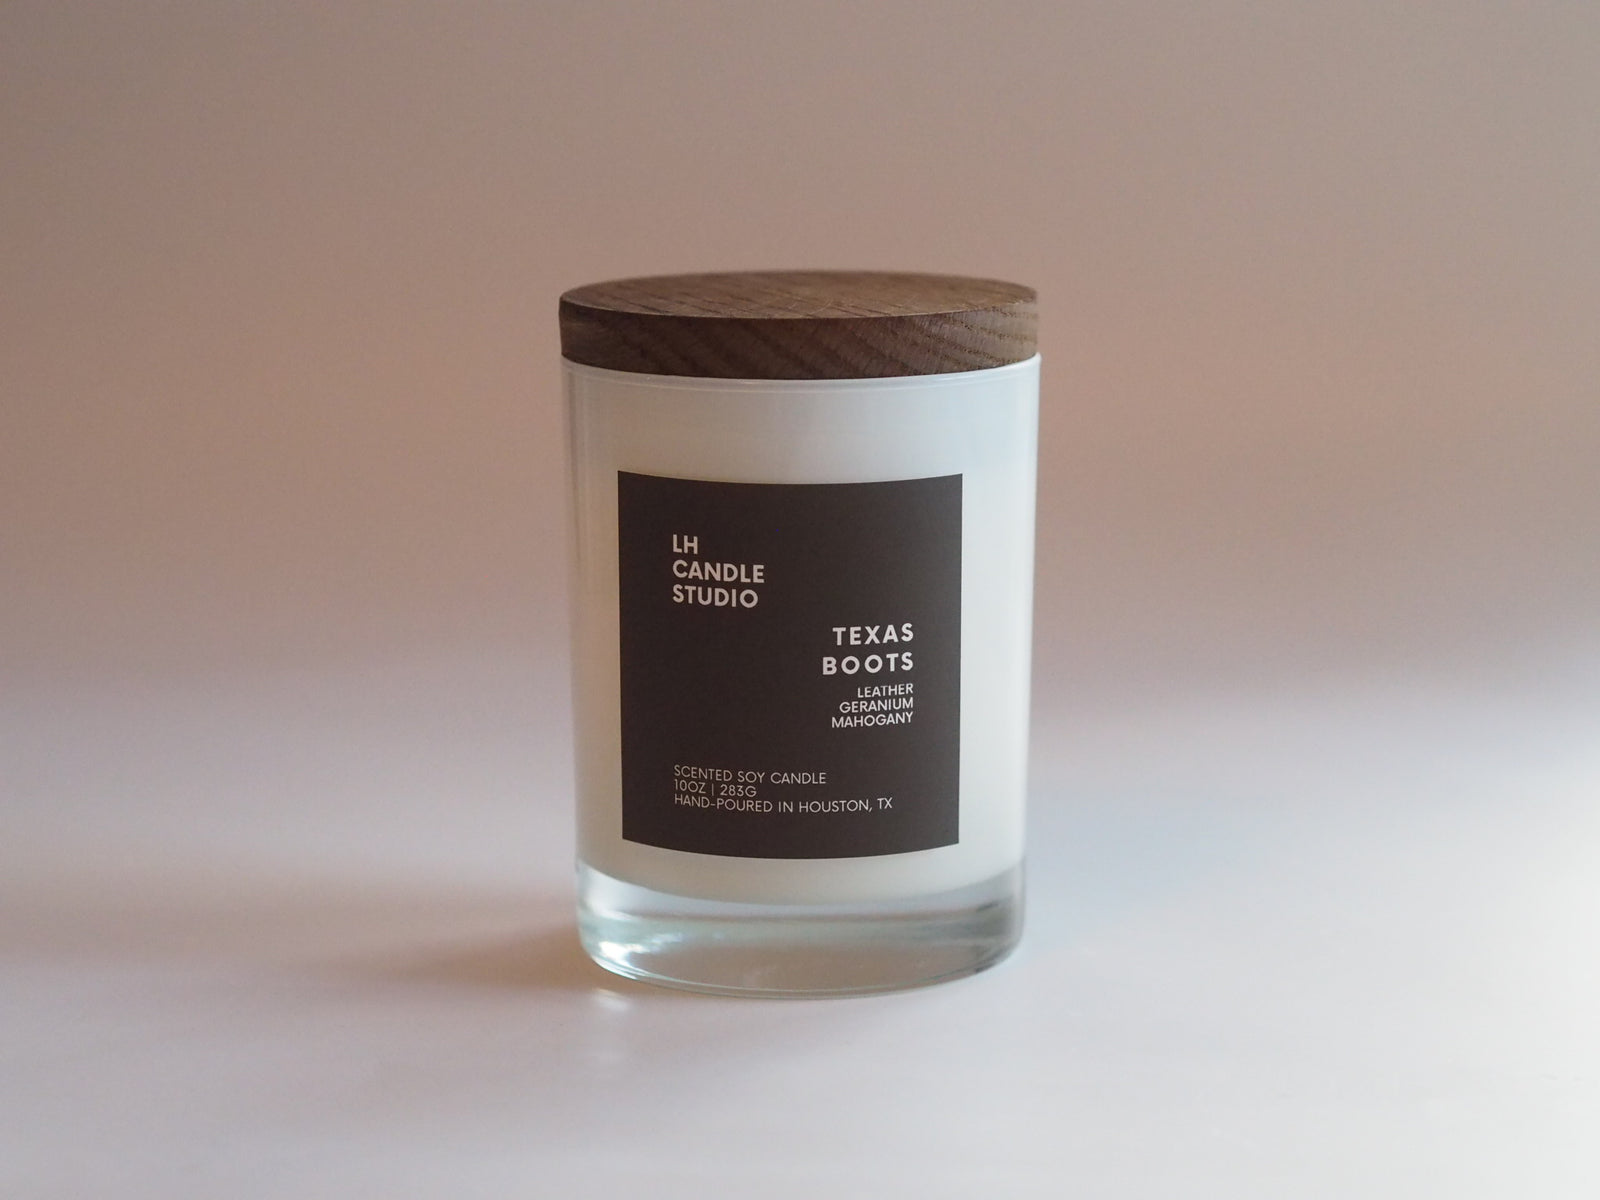 Texas Boots Candle - LH CANDLE STUDIO